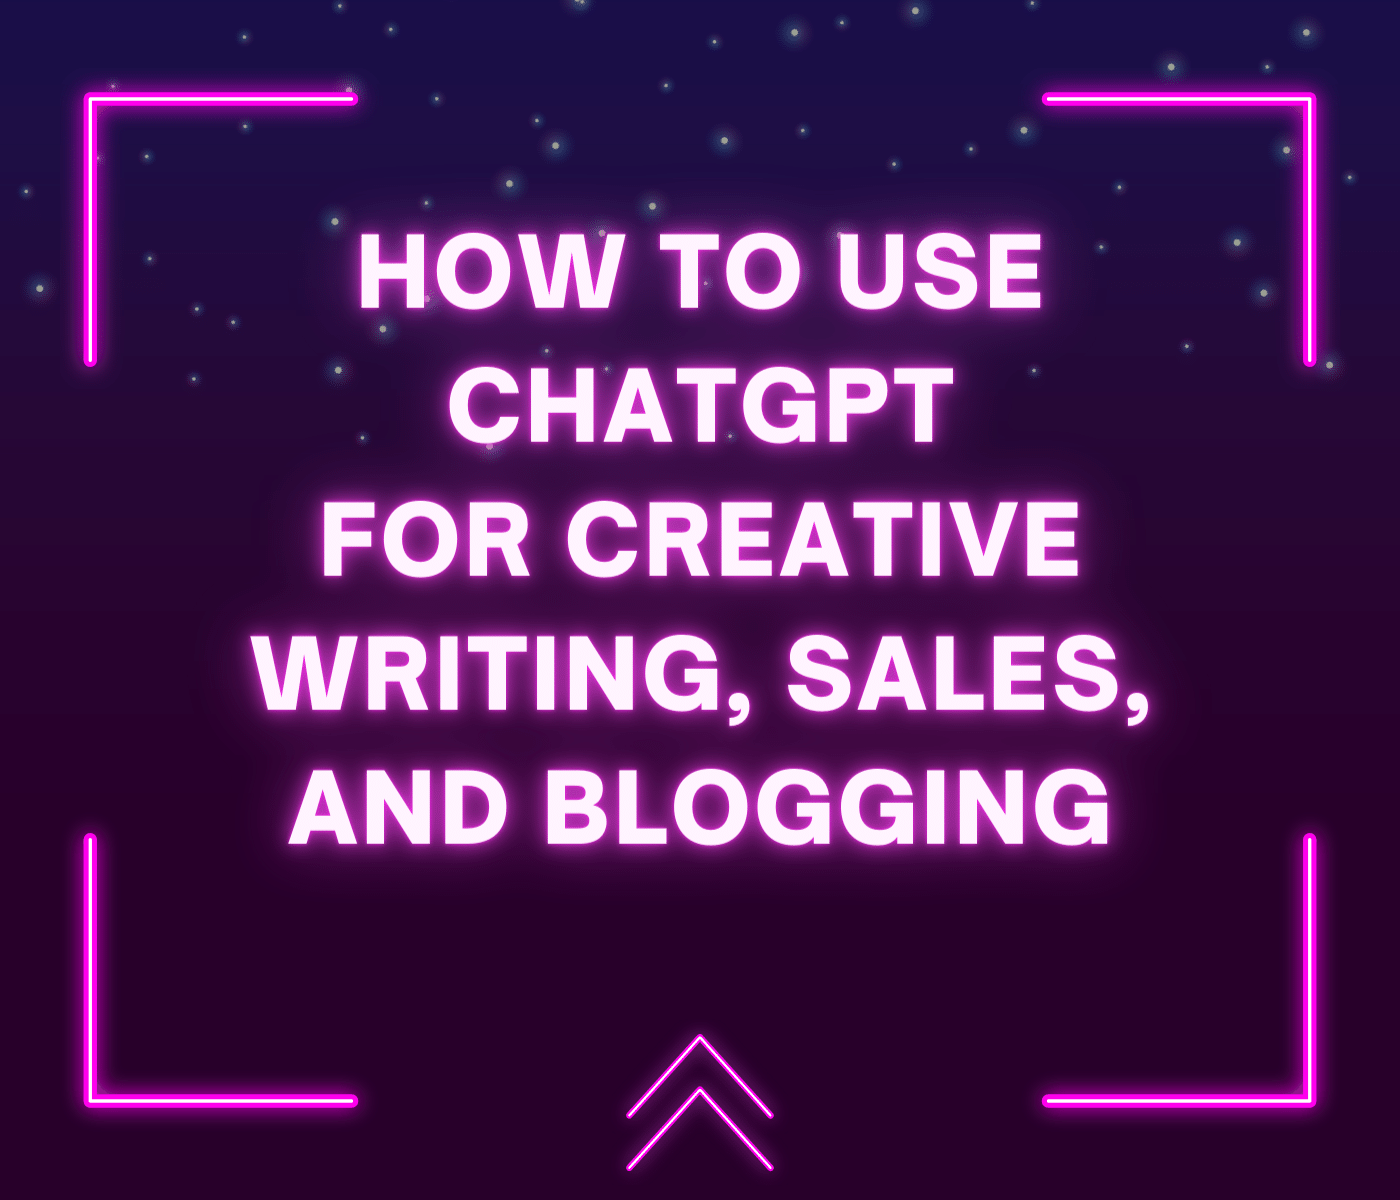 How to Use ChatGPT for Creative Writing, Sales, and Blogging